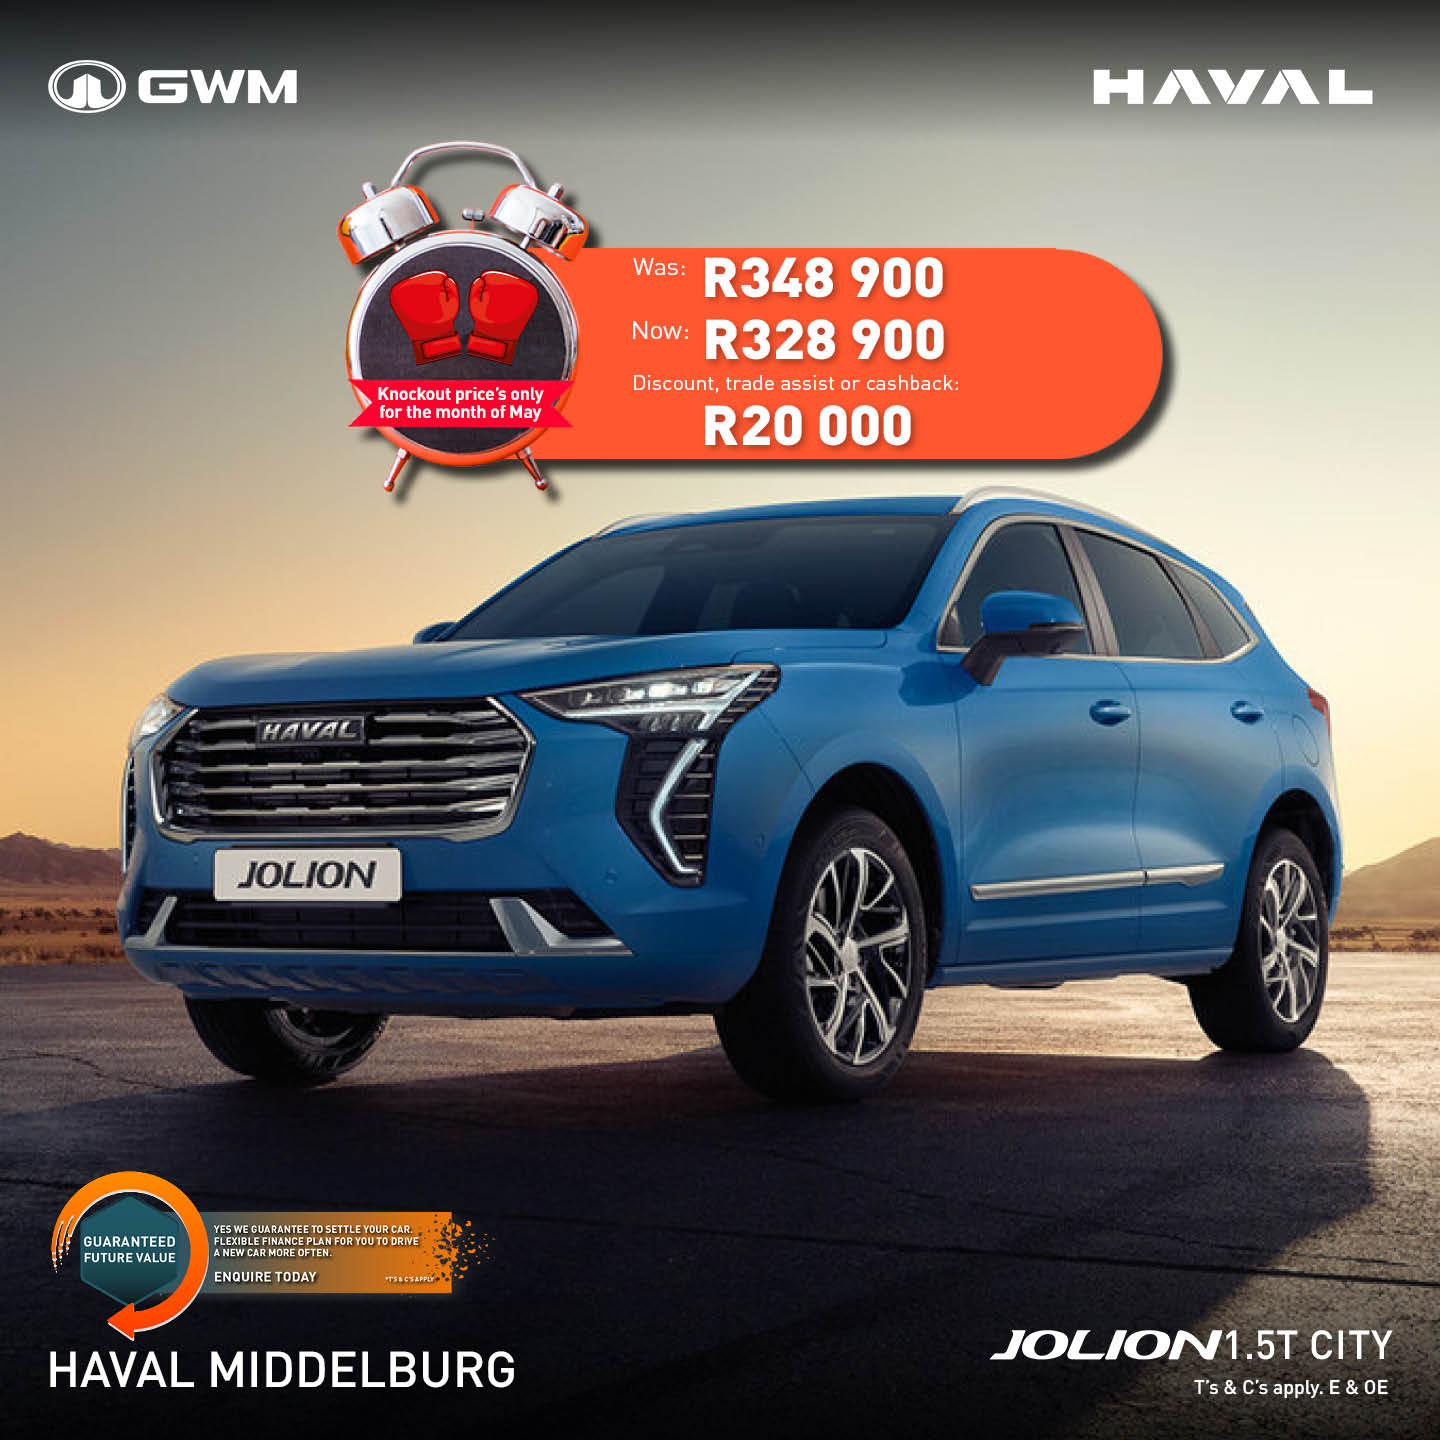 Haval Jolion 1.5T City image from 